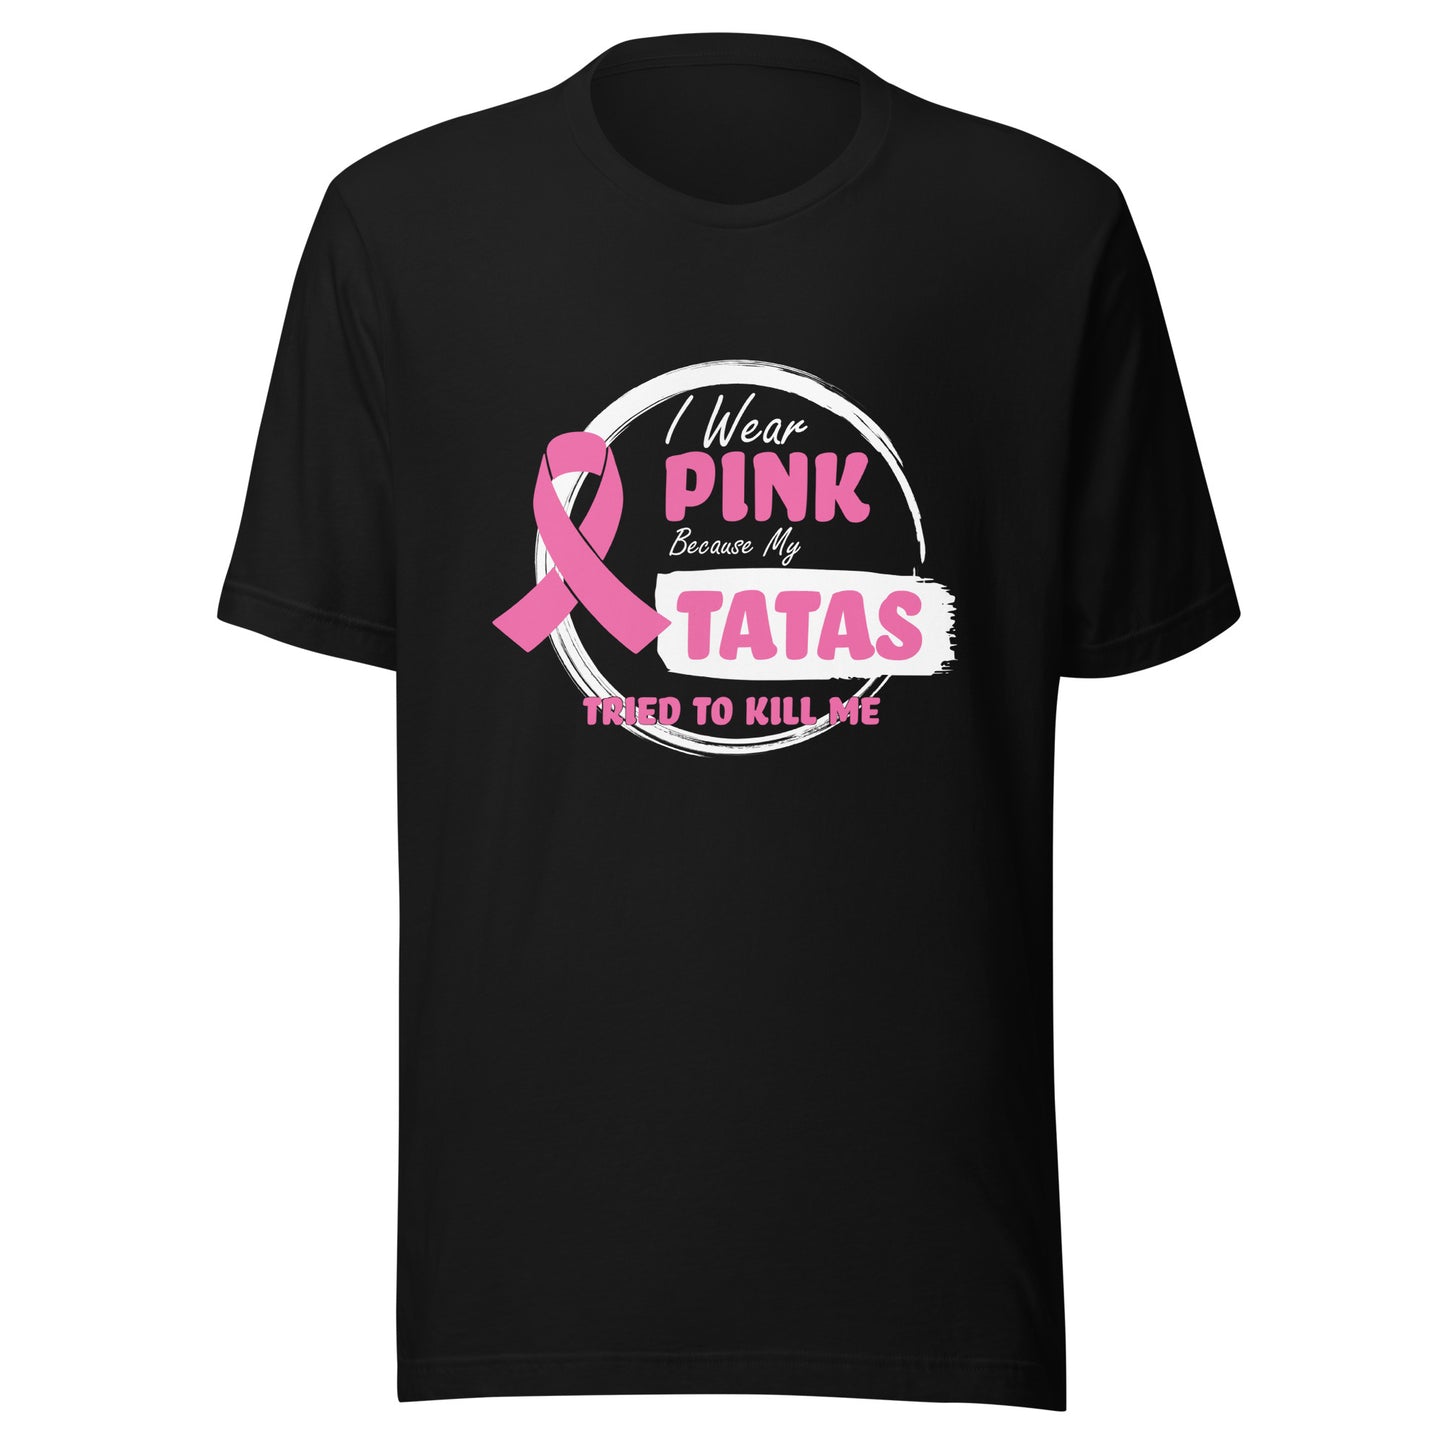 I Wear Pink Because My Tatas Tried To Kill Me - Breast Cancer Awareness - Humor - Funny Unisex T-shirt